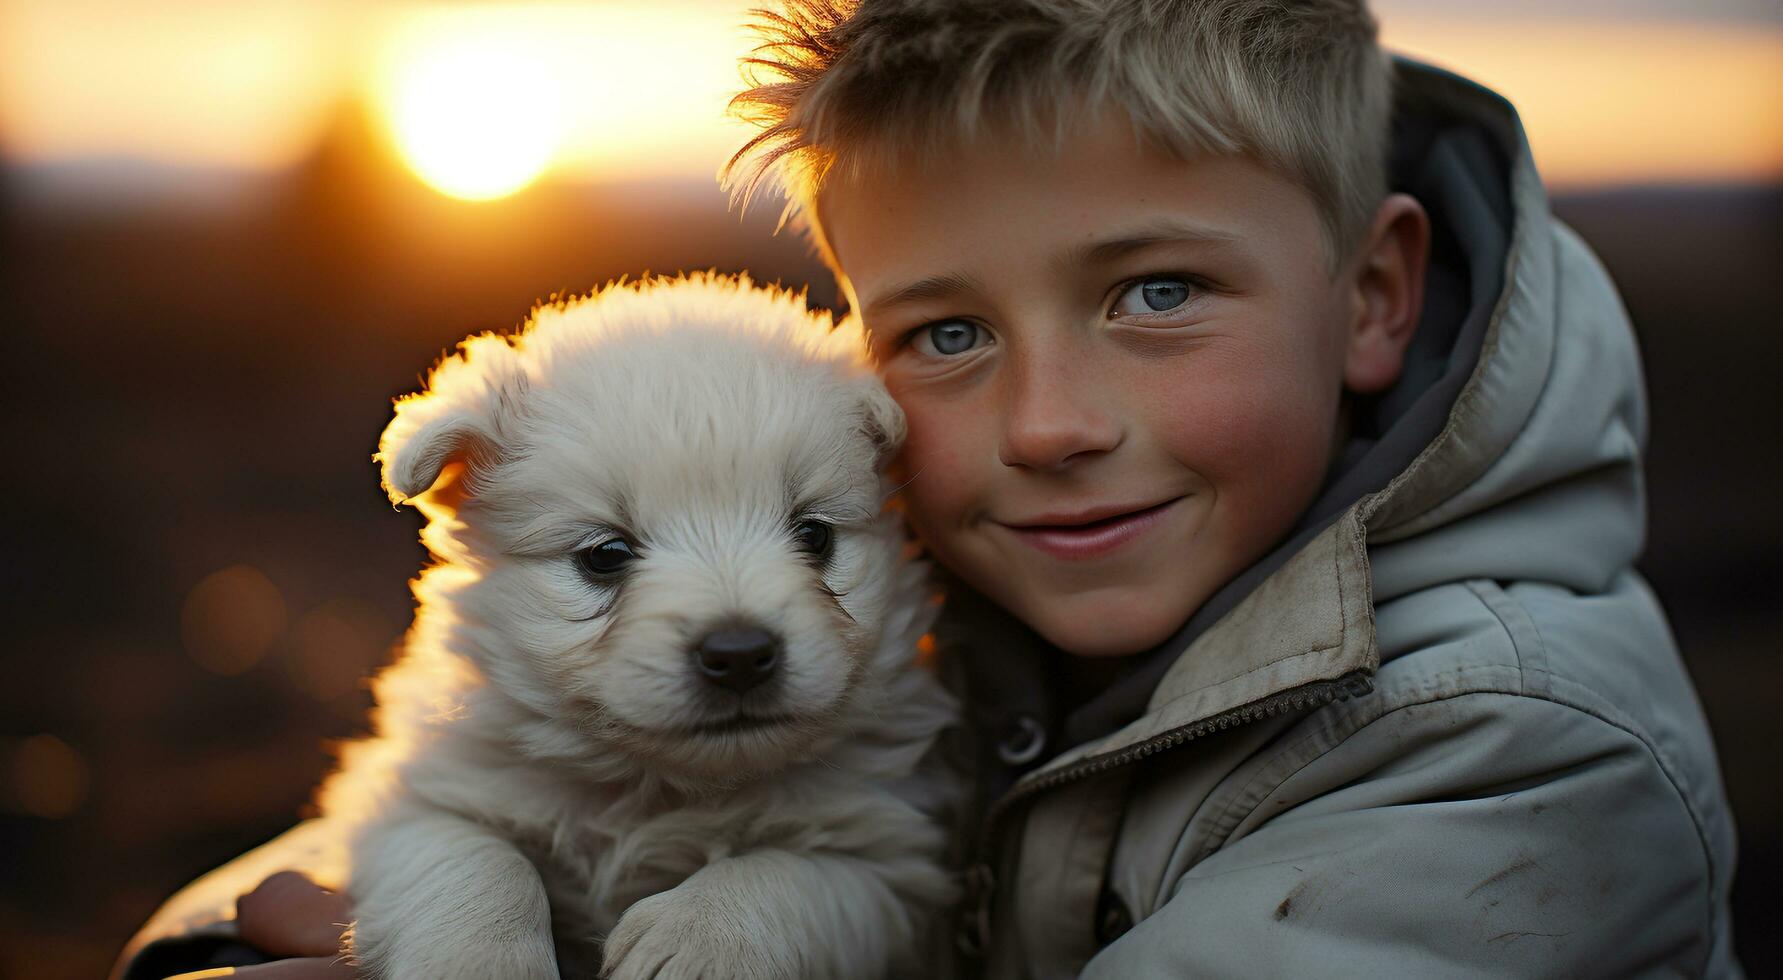 Smiling child embraces cute puppy, enjoying nature cheerful innocence generated by AI photo